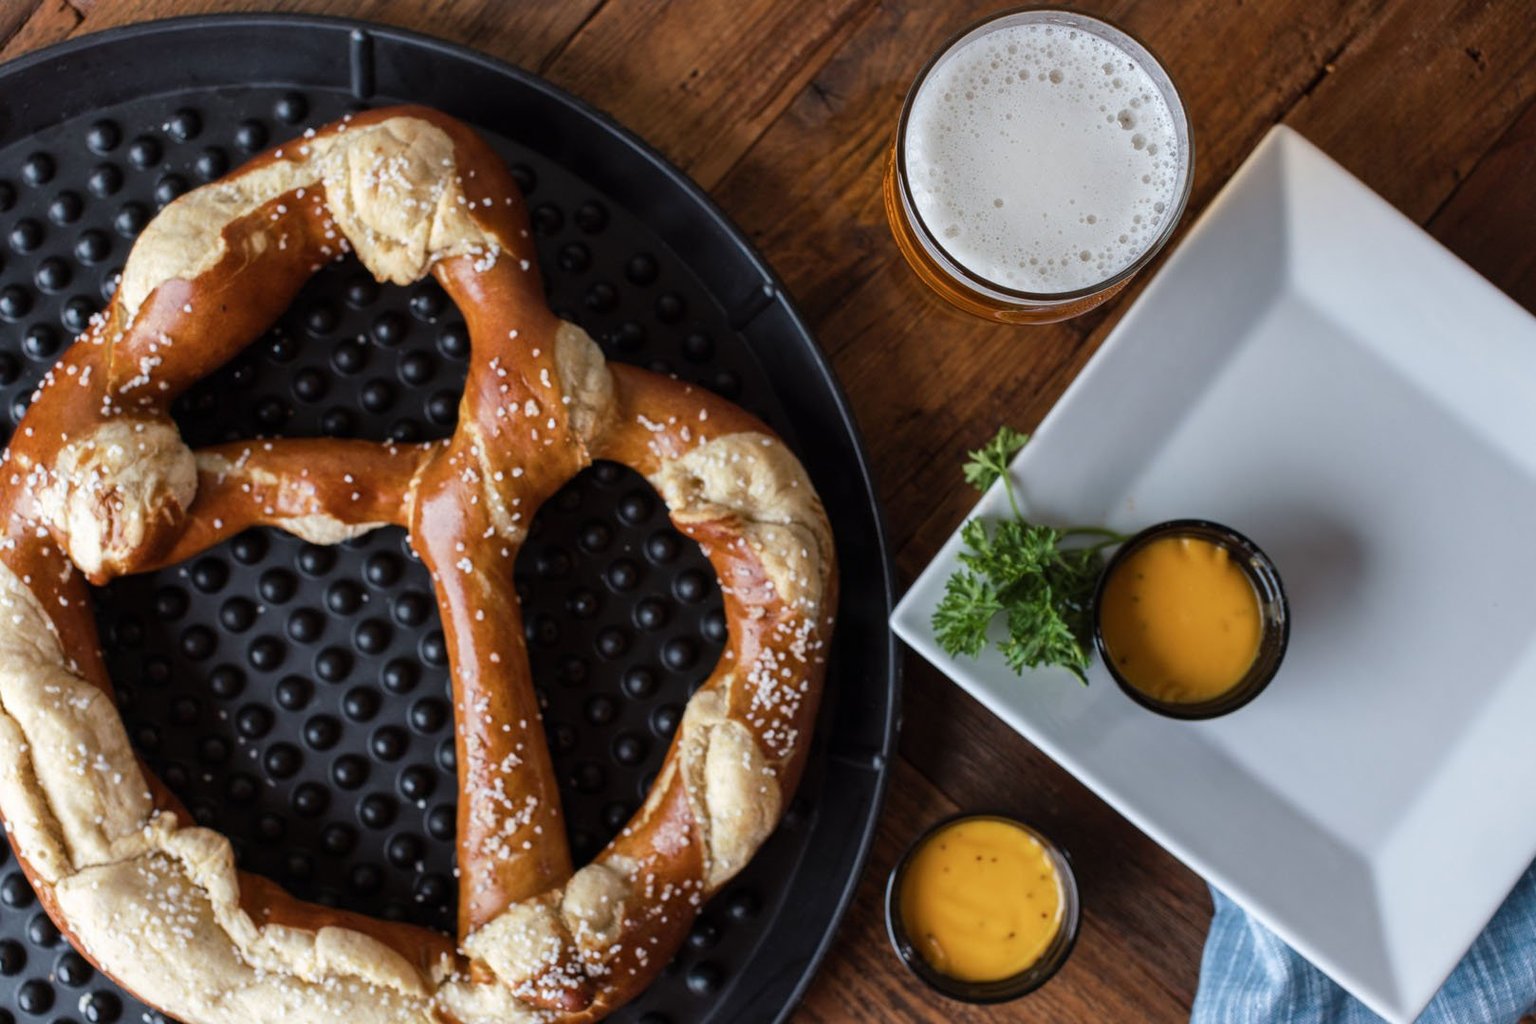 Bavarian Pretzel with Beer Cheese